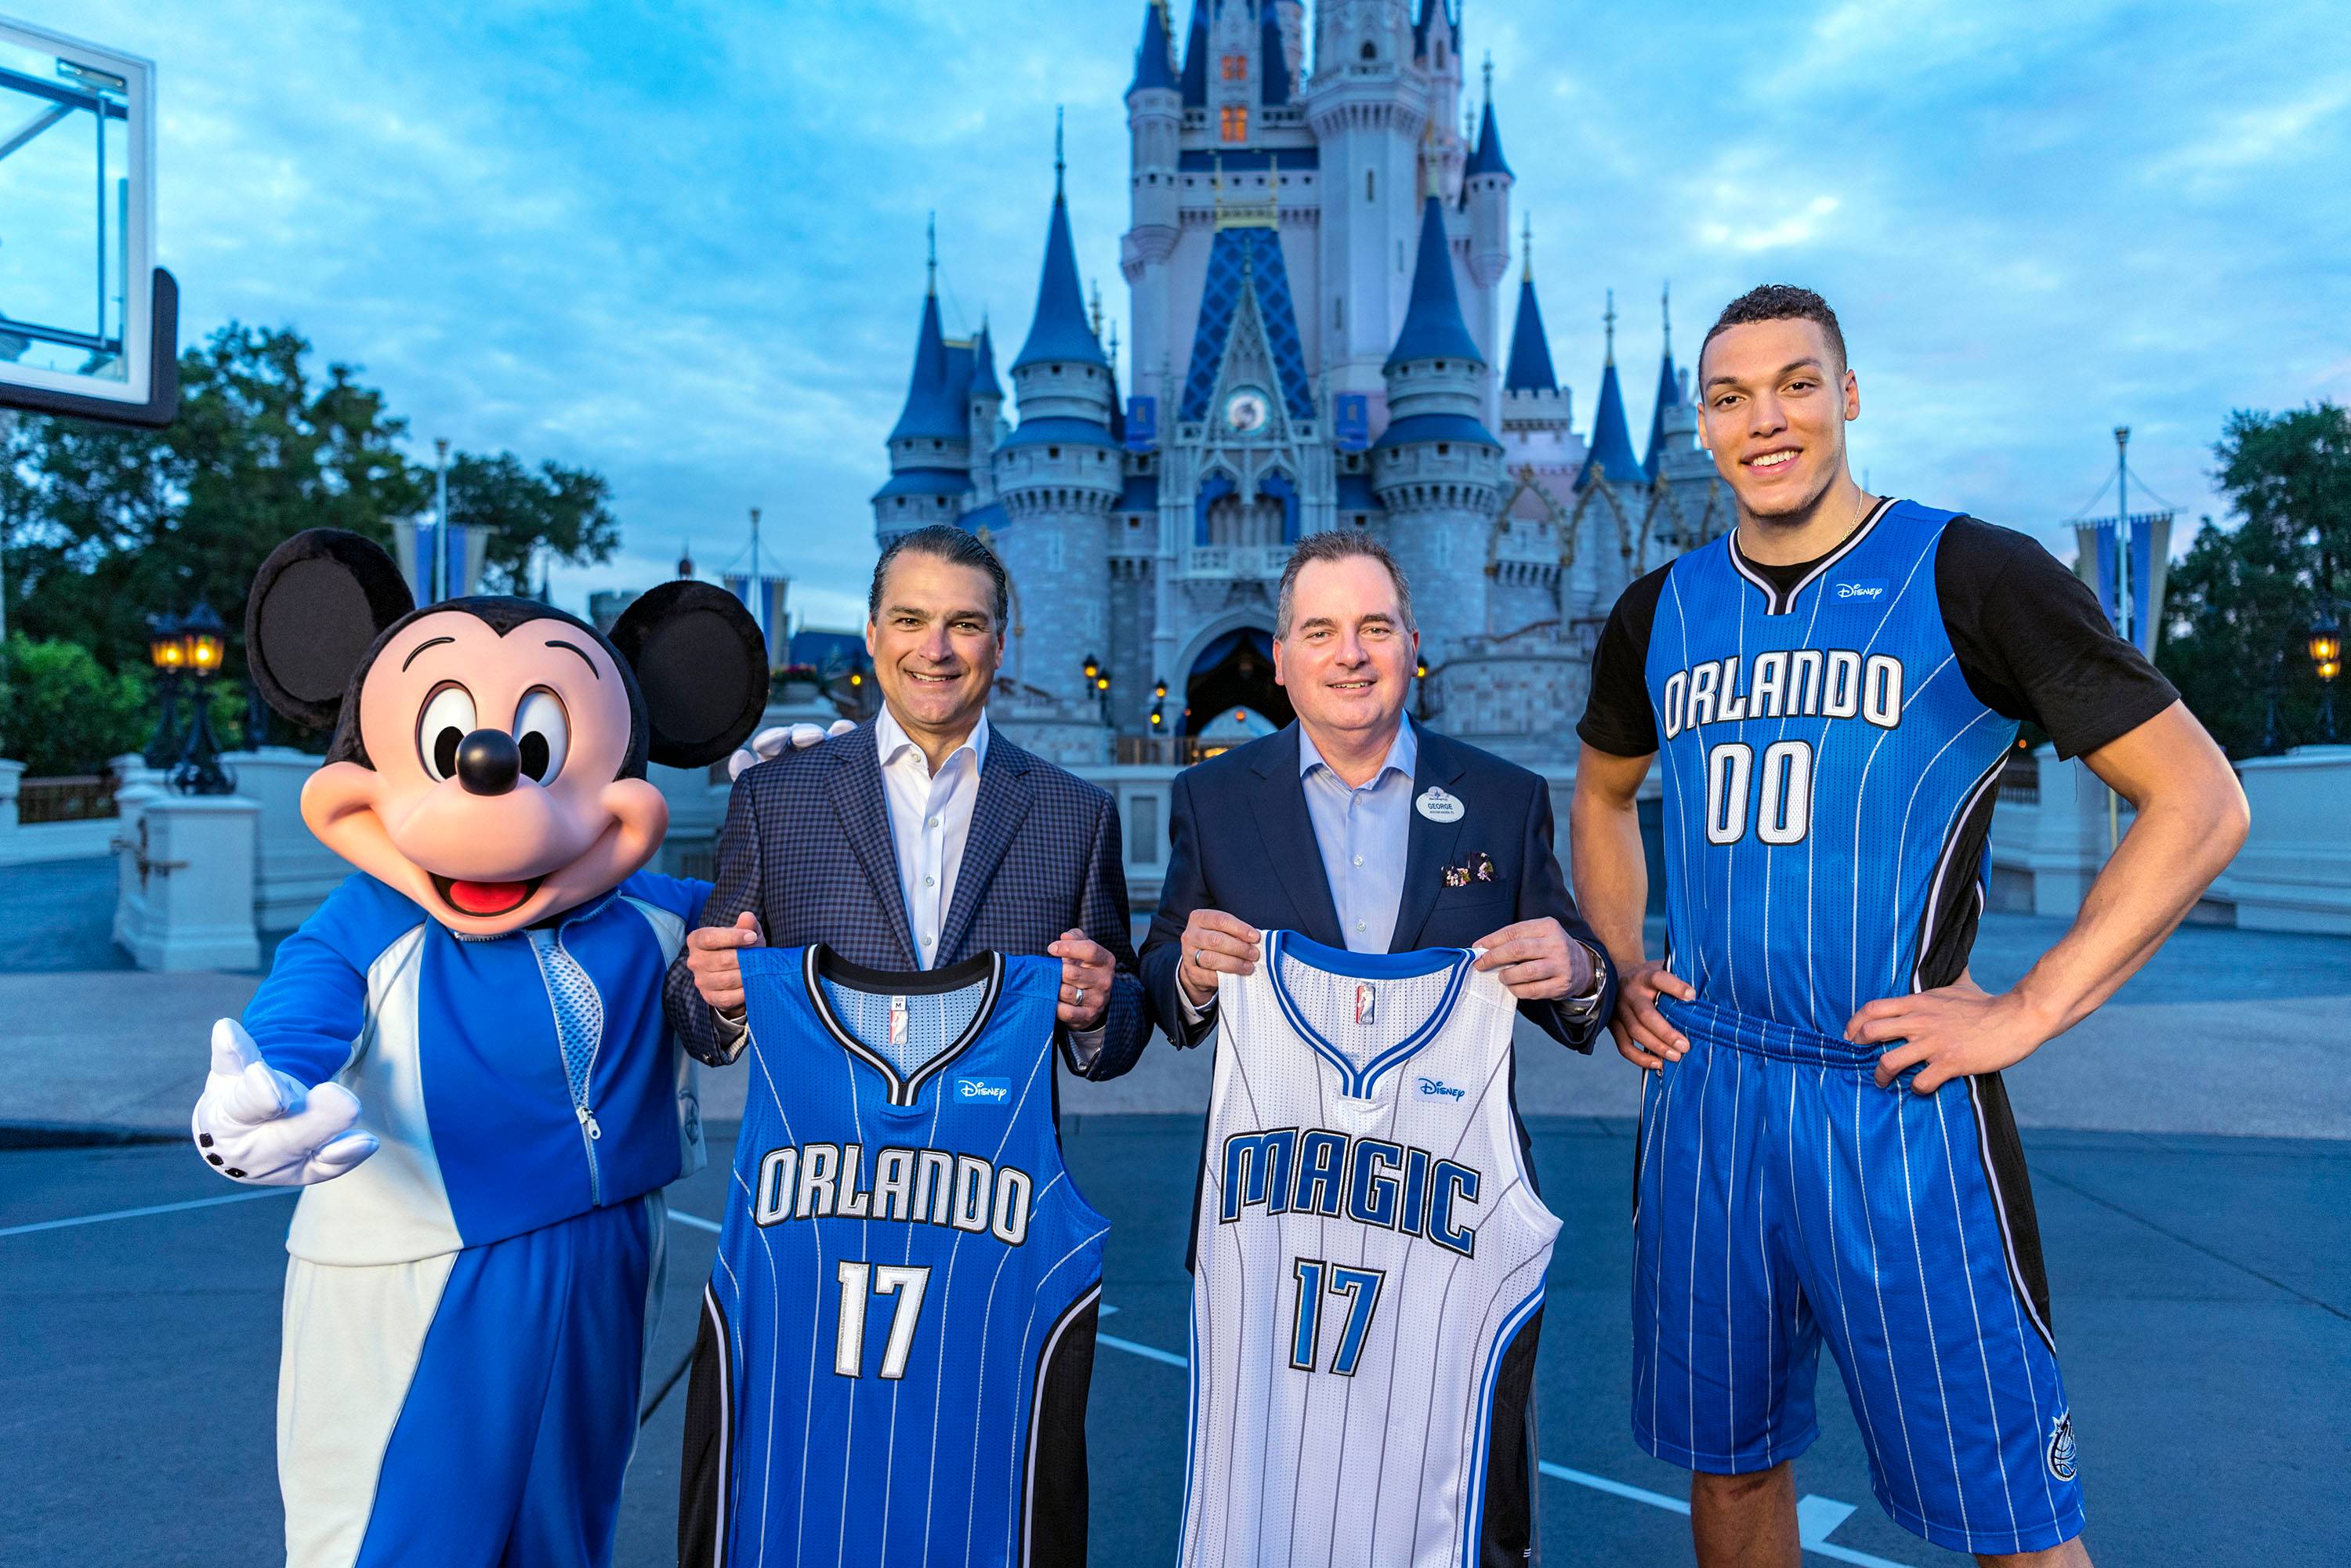 Orlando Magic CEO Alex Martins and Walt Disney World Resort President George A. Kalogridis in 2017 pose with Orlando Magic star Aaron Gordon and Mickey Mouse as part of the announcement of Disney becoming the team’s first jersey sponsor